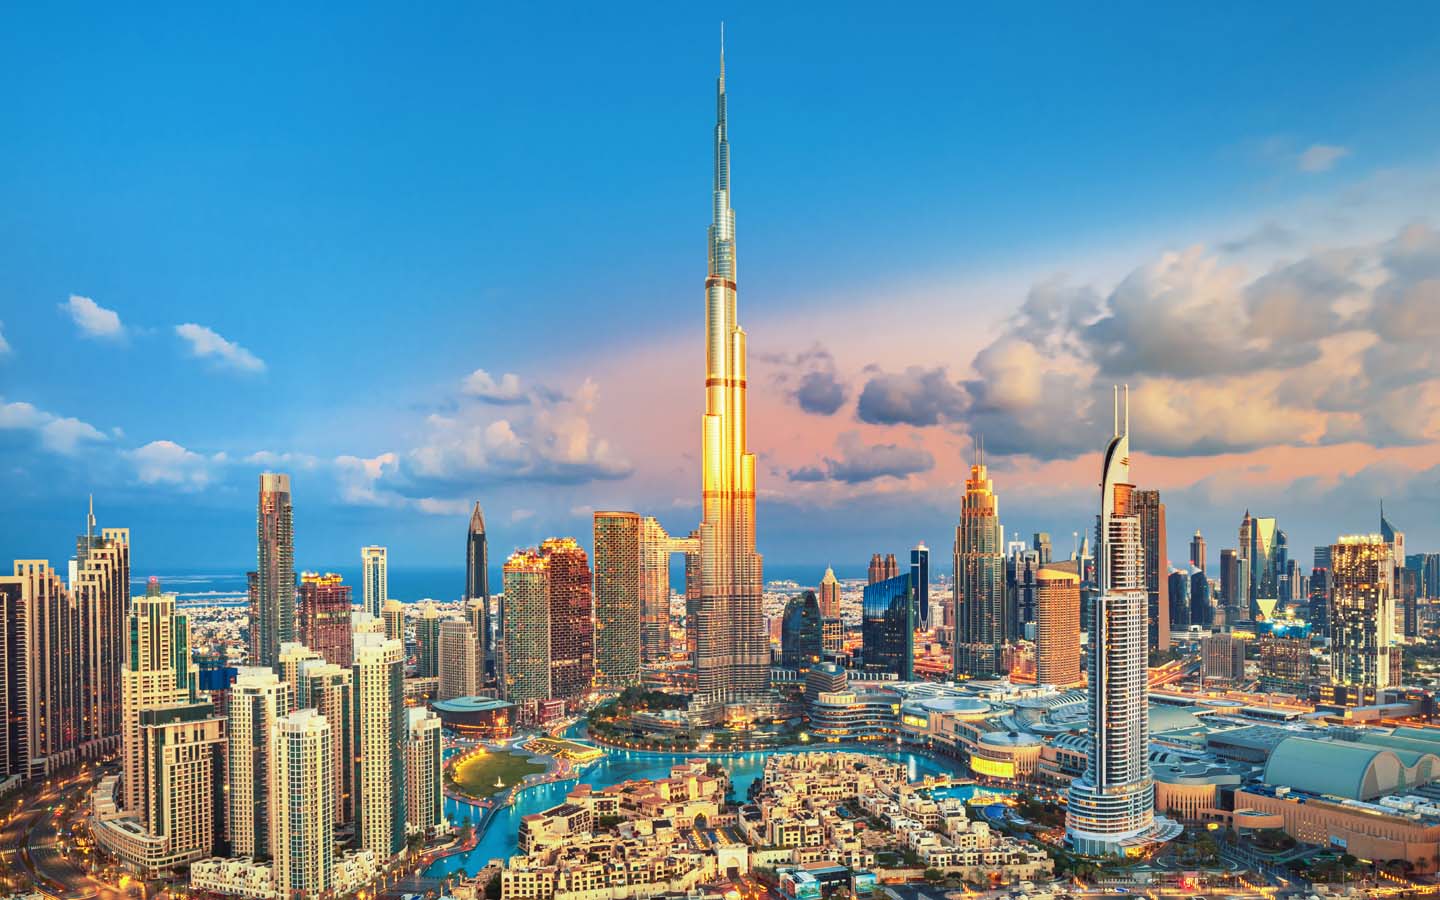 dubai's worldclass views and infrastructure makes it a viable option to set up a real estate business in the city